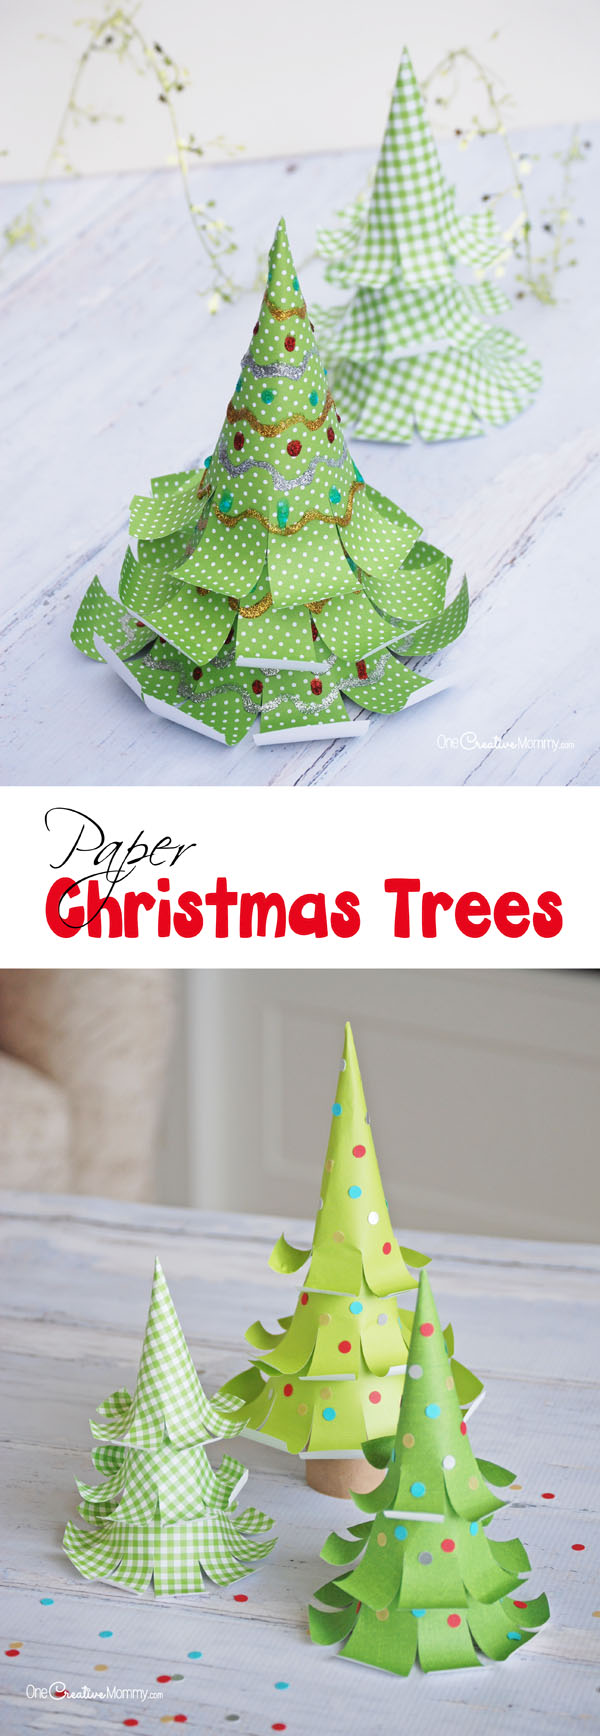 The Cutest Paper Christmas Trees! - onecreativemommy.com